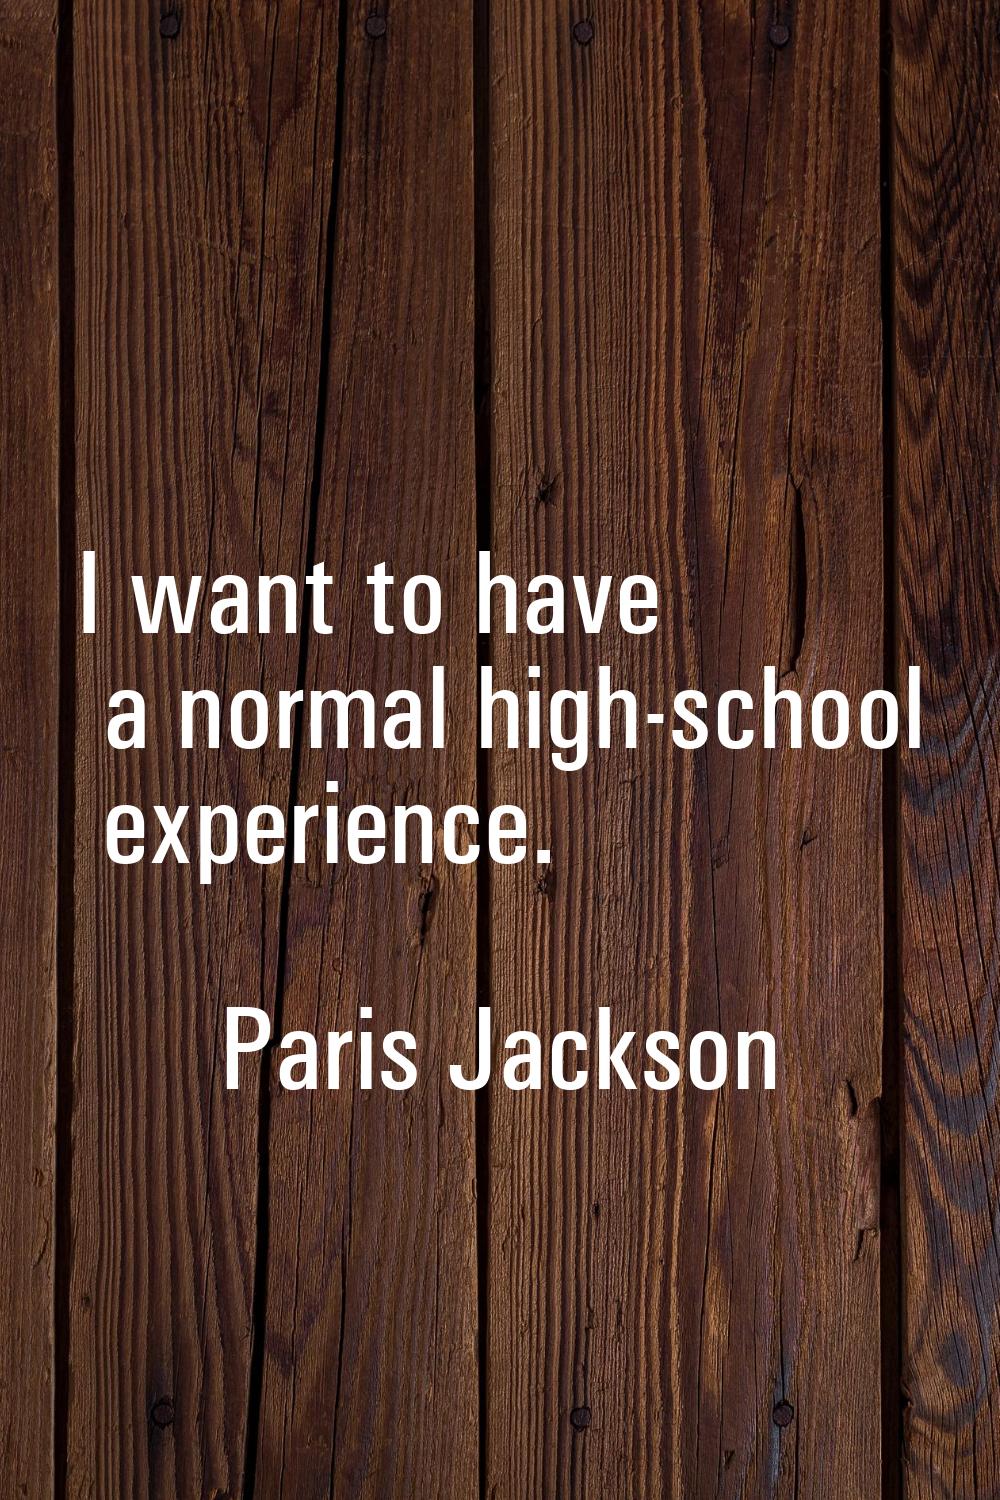 I want to have a normal high-school experience.